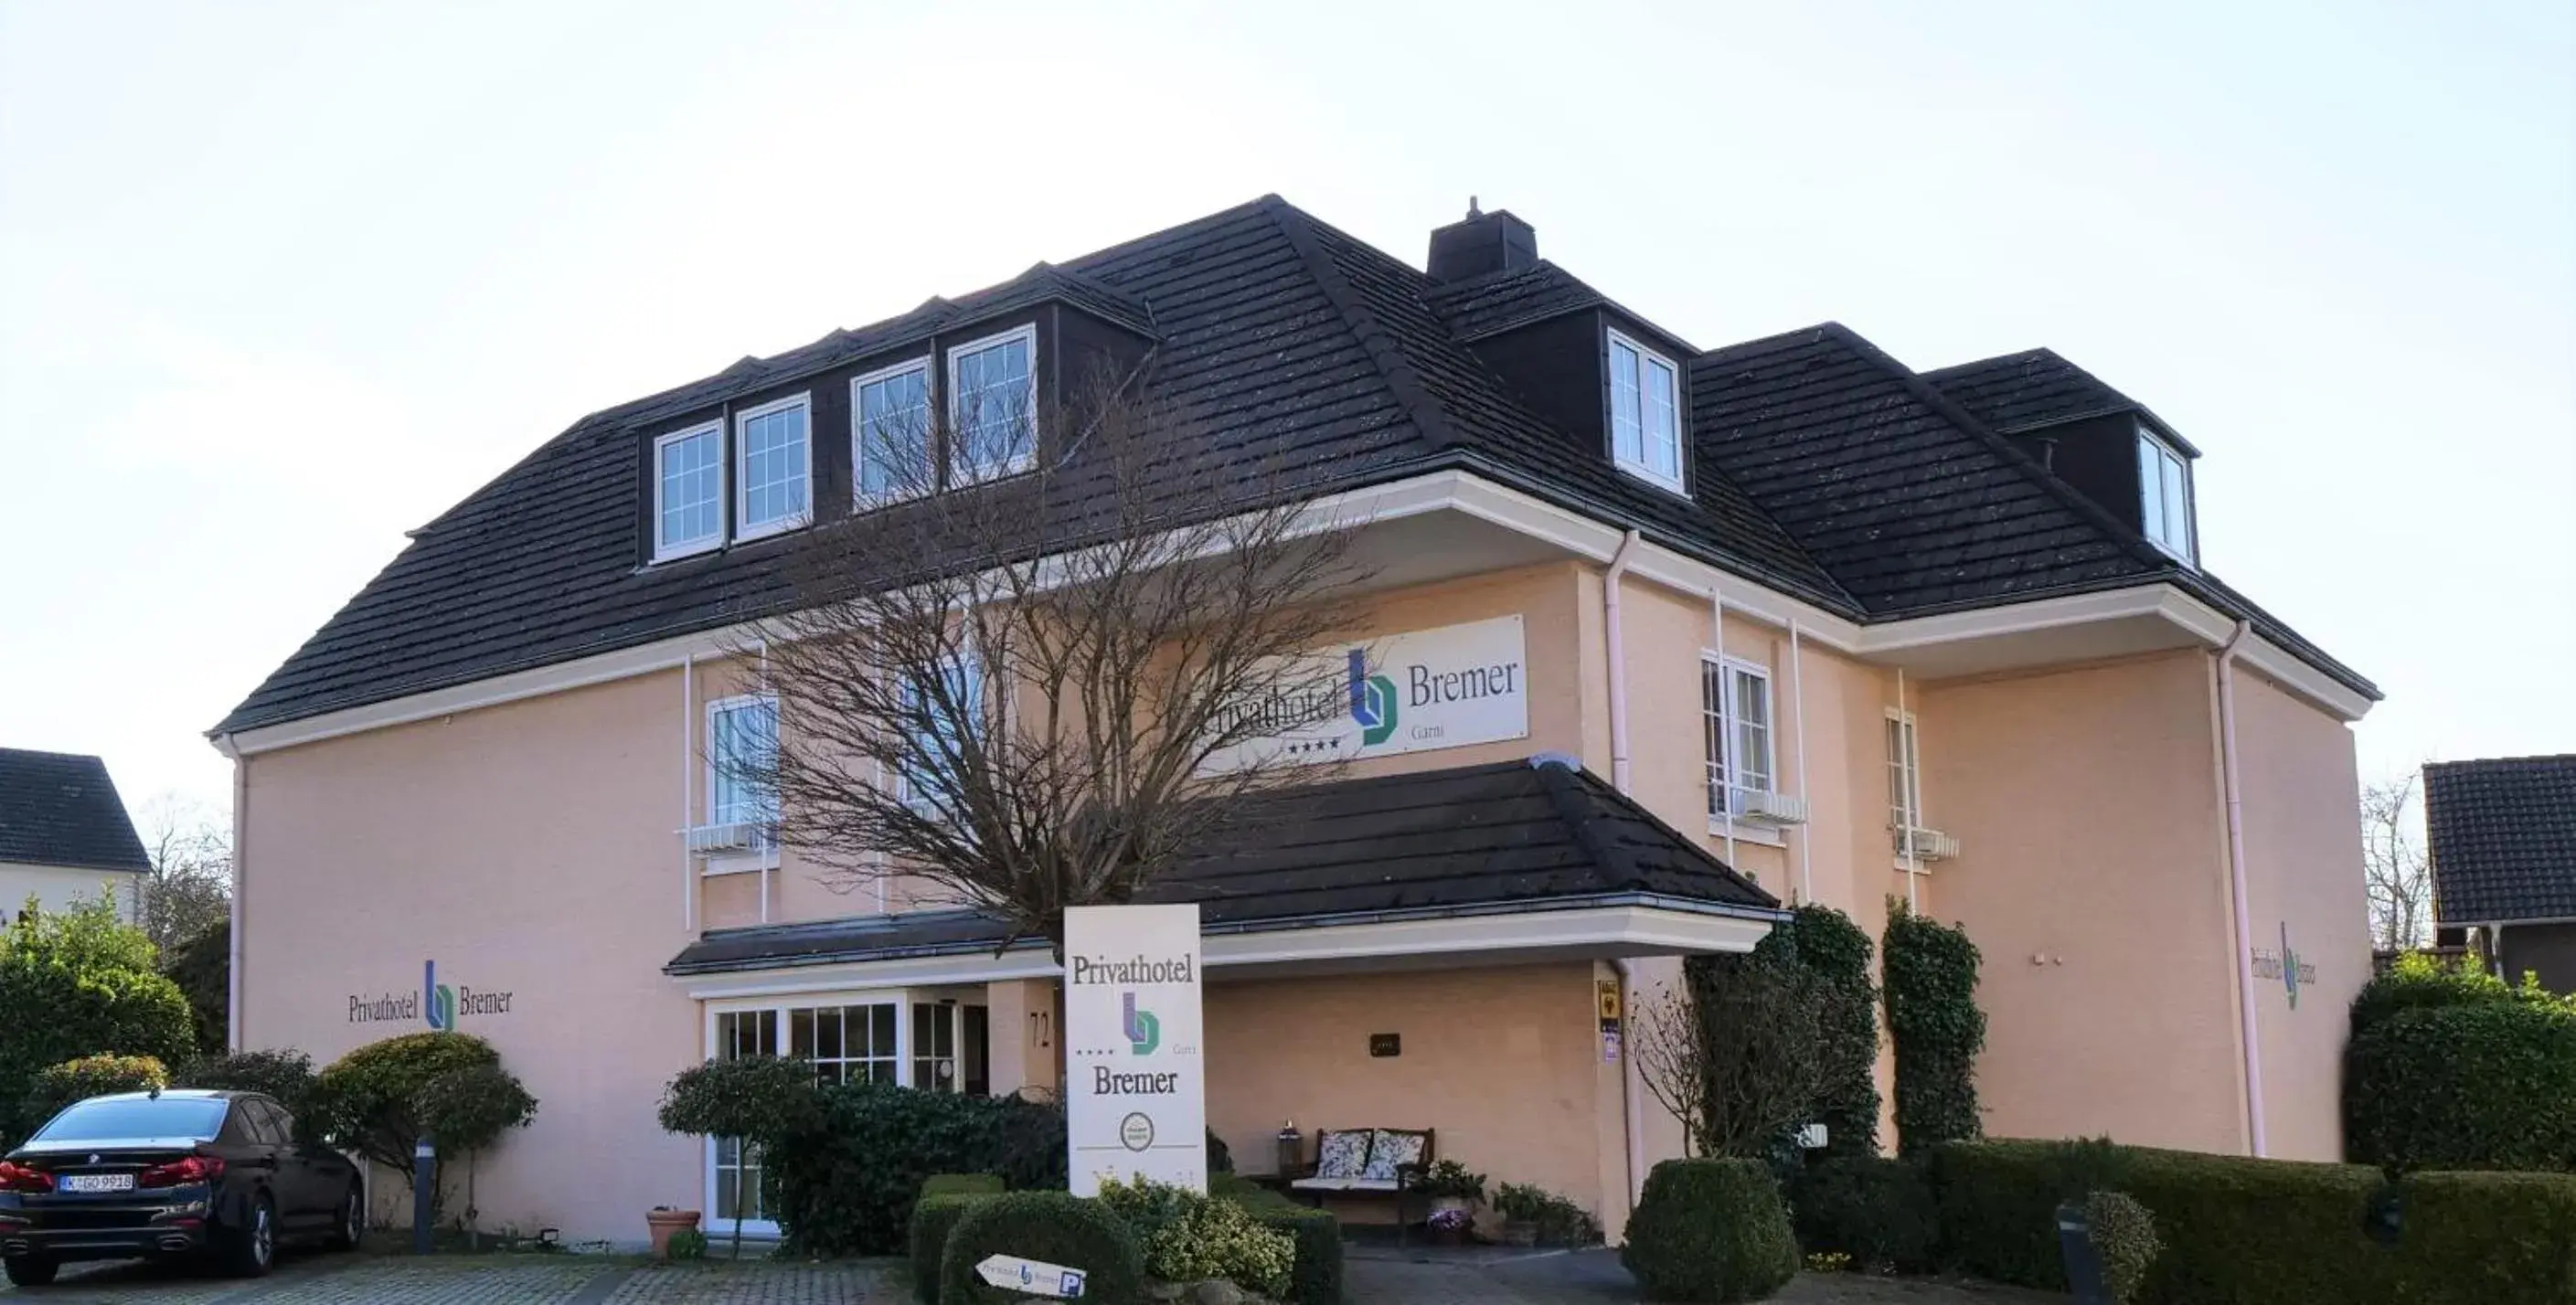 Property Building in Privathotel Bremer